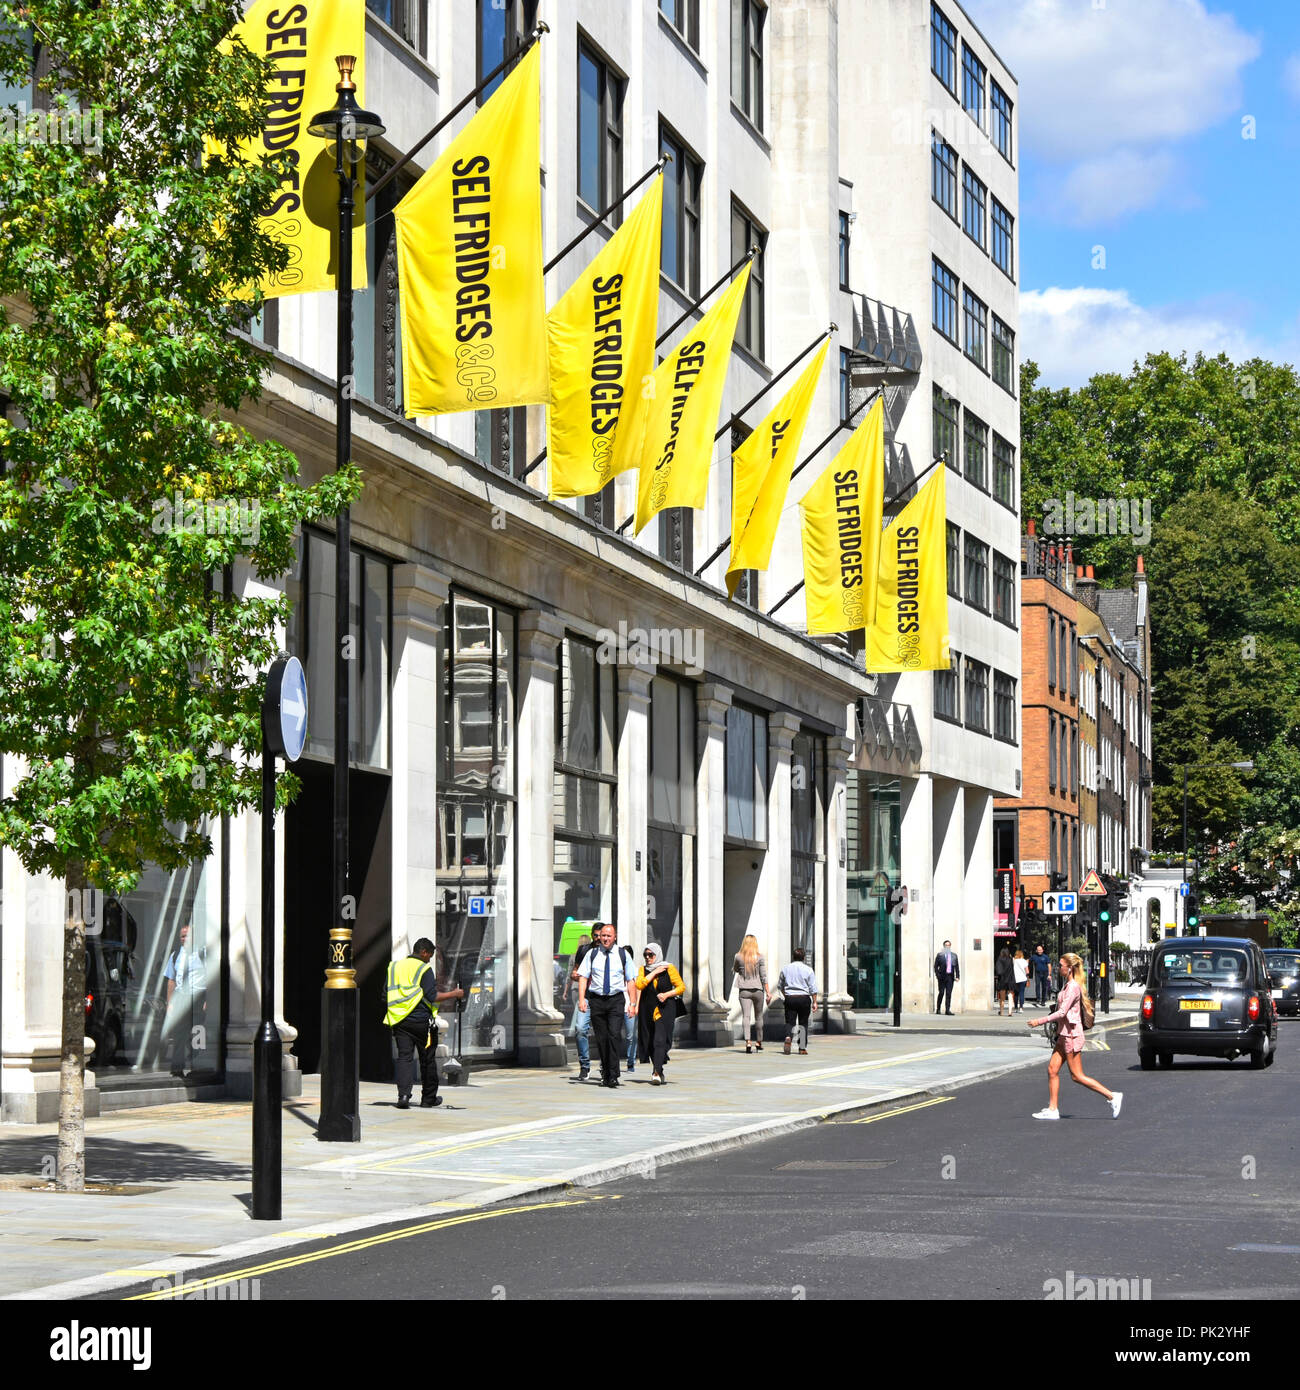 Selfridges department store yellow banners above Duke Street annex building behind famous Oxford Street West End London shopping area England UK Stock Photo